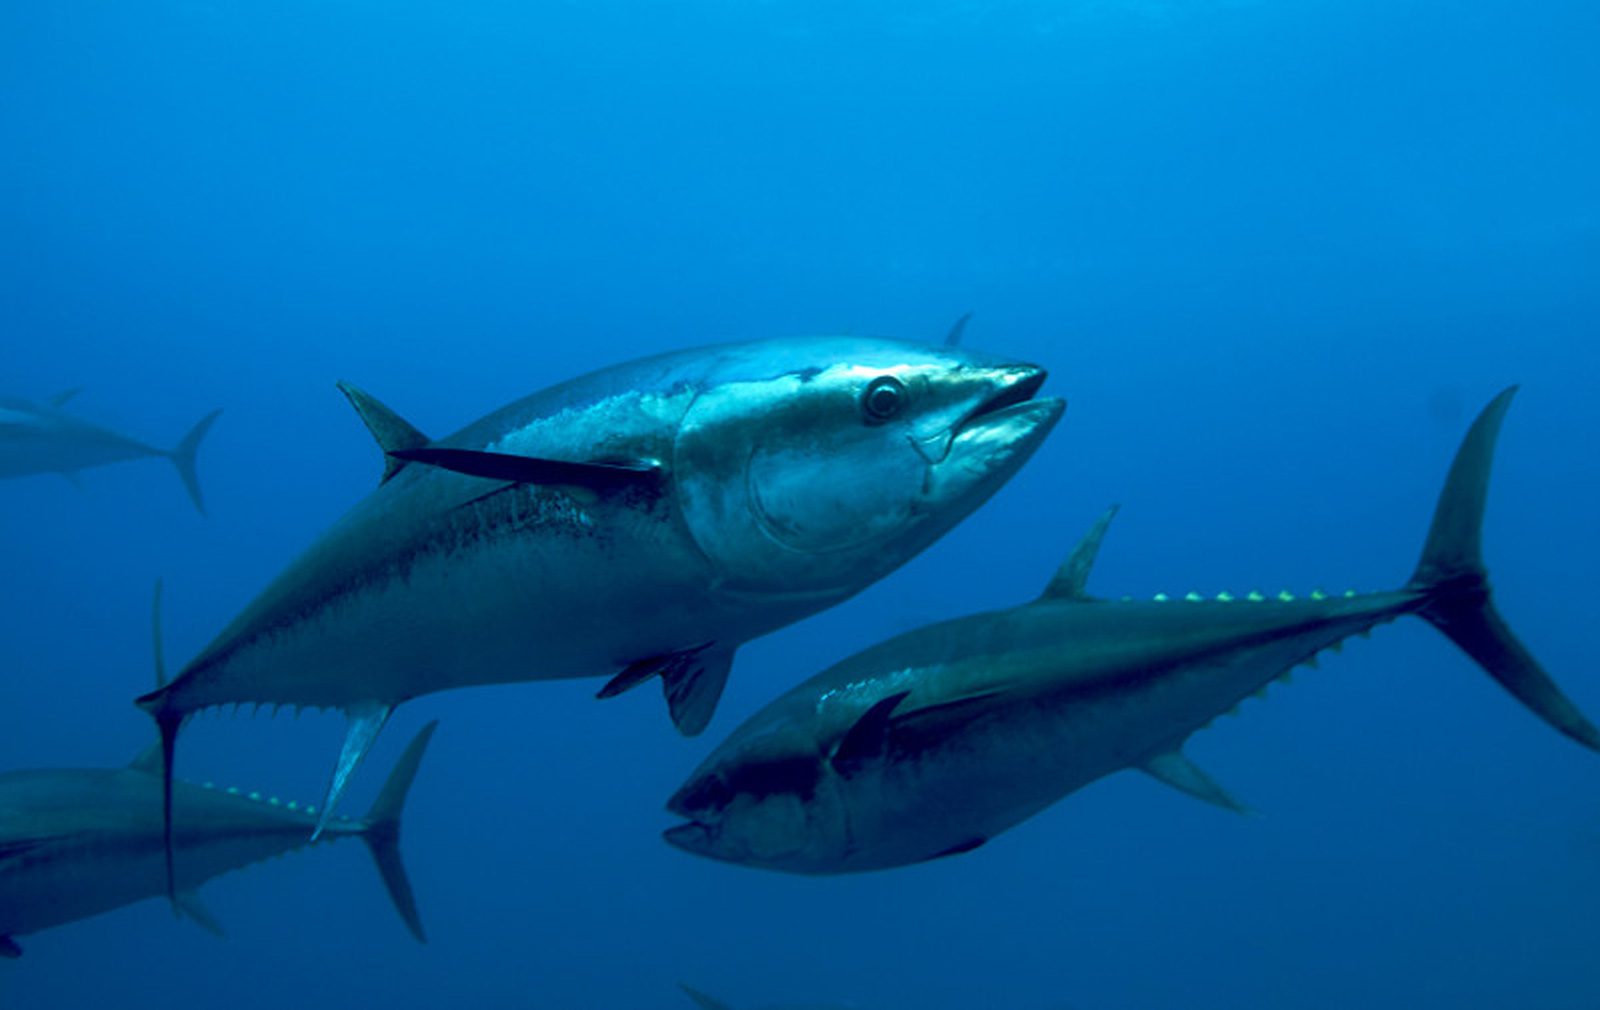 Fish Species of the Month: Bluefin Tuna